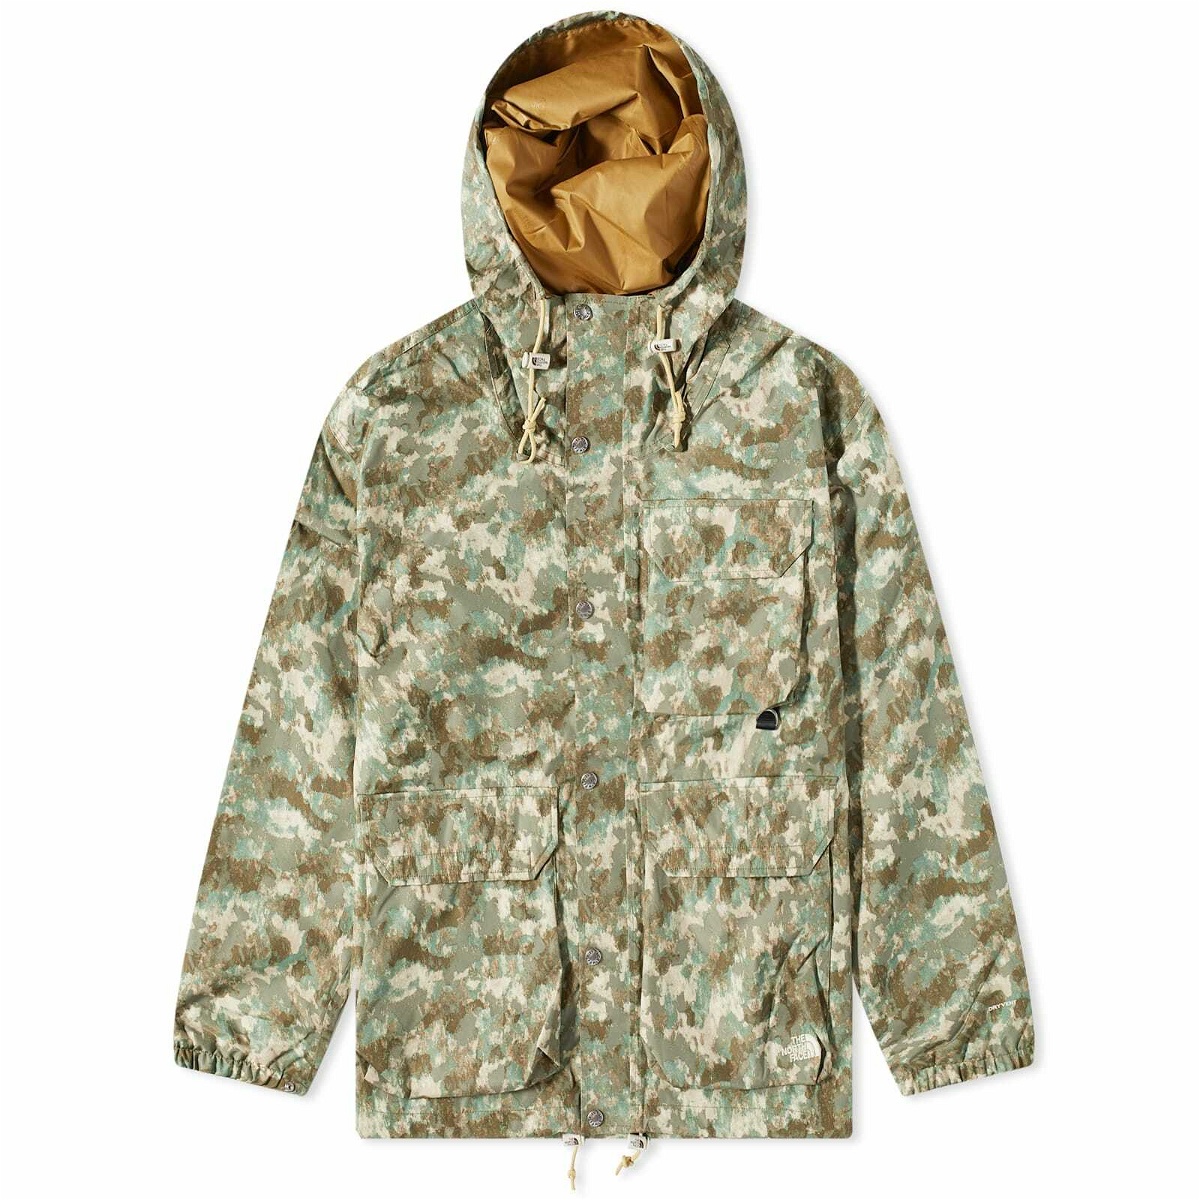 The North Face Men's M66 Utility Rain Jacket in Military Olive Stippled  Camo Print